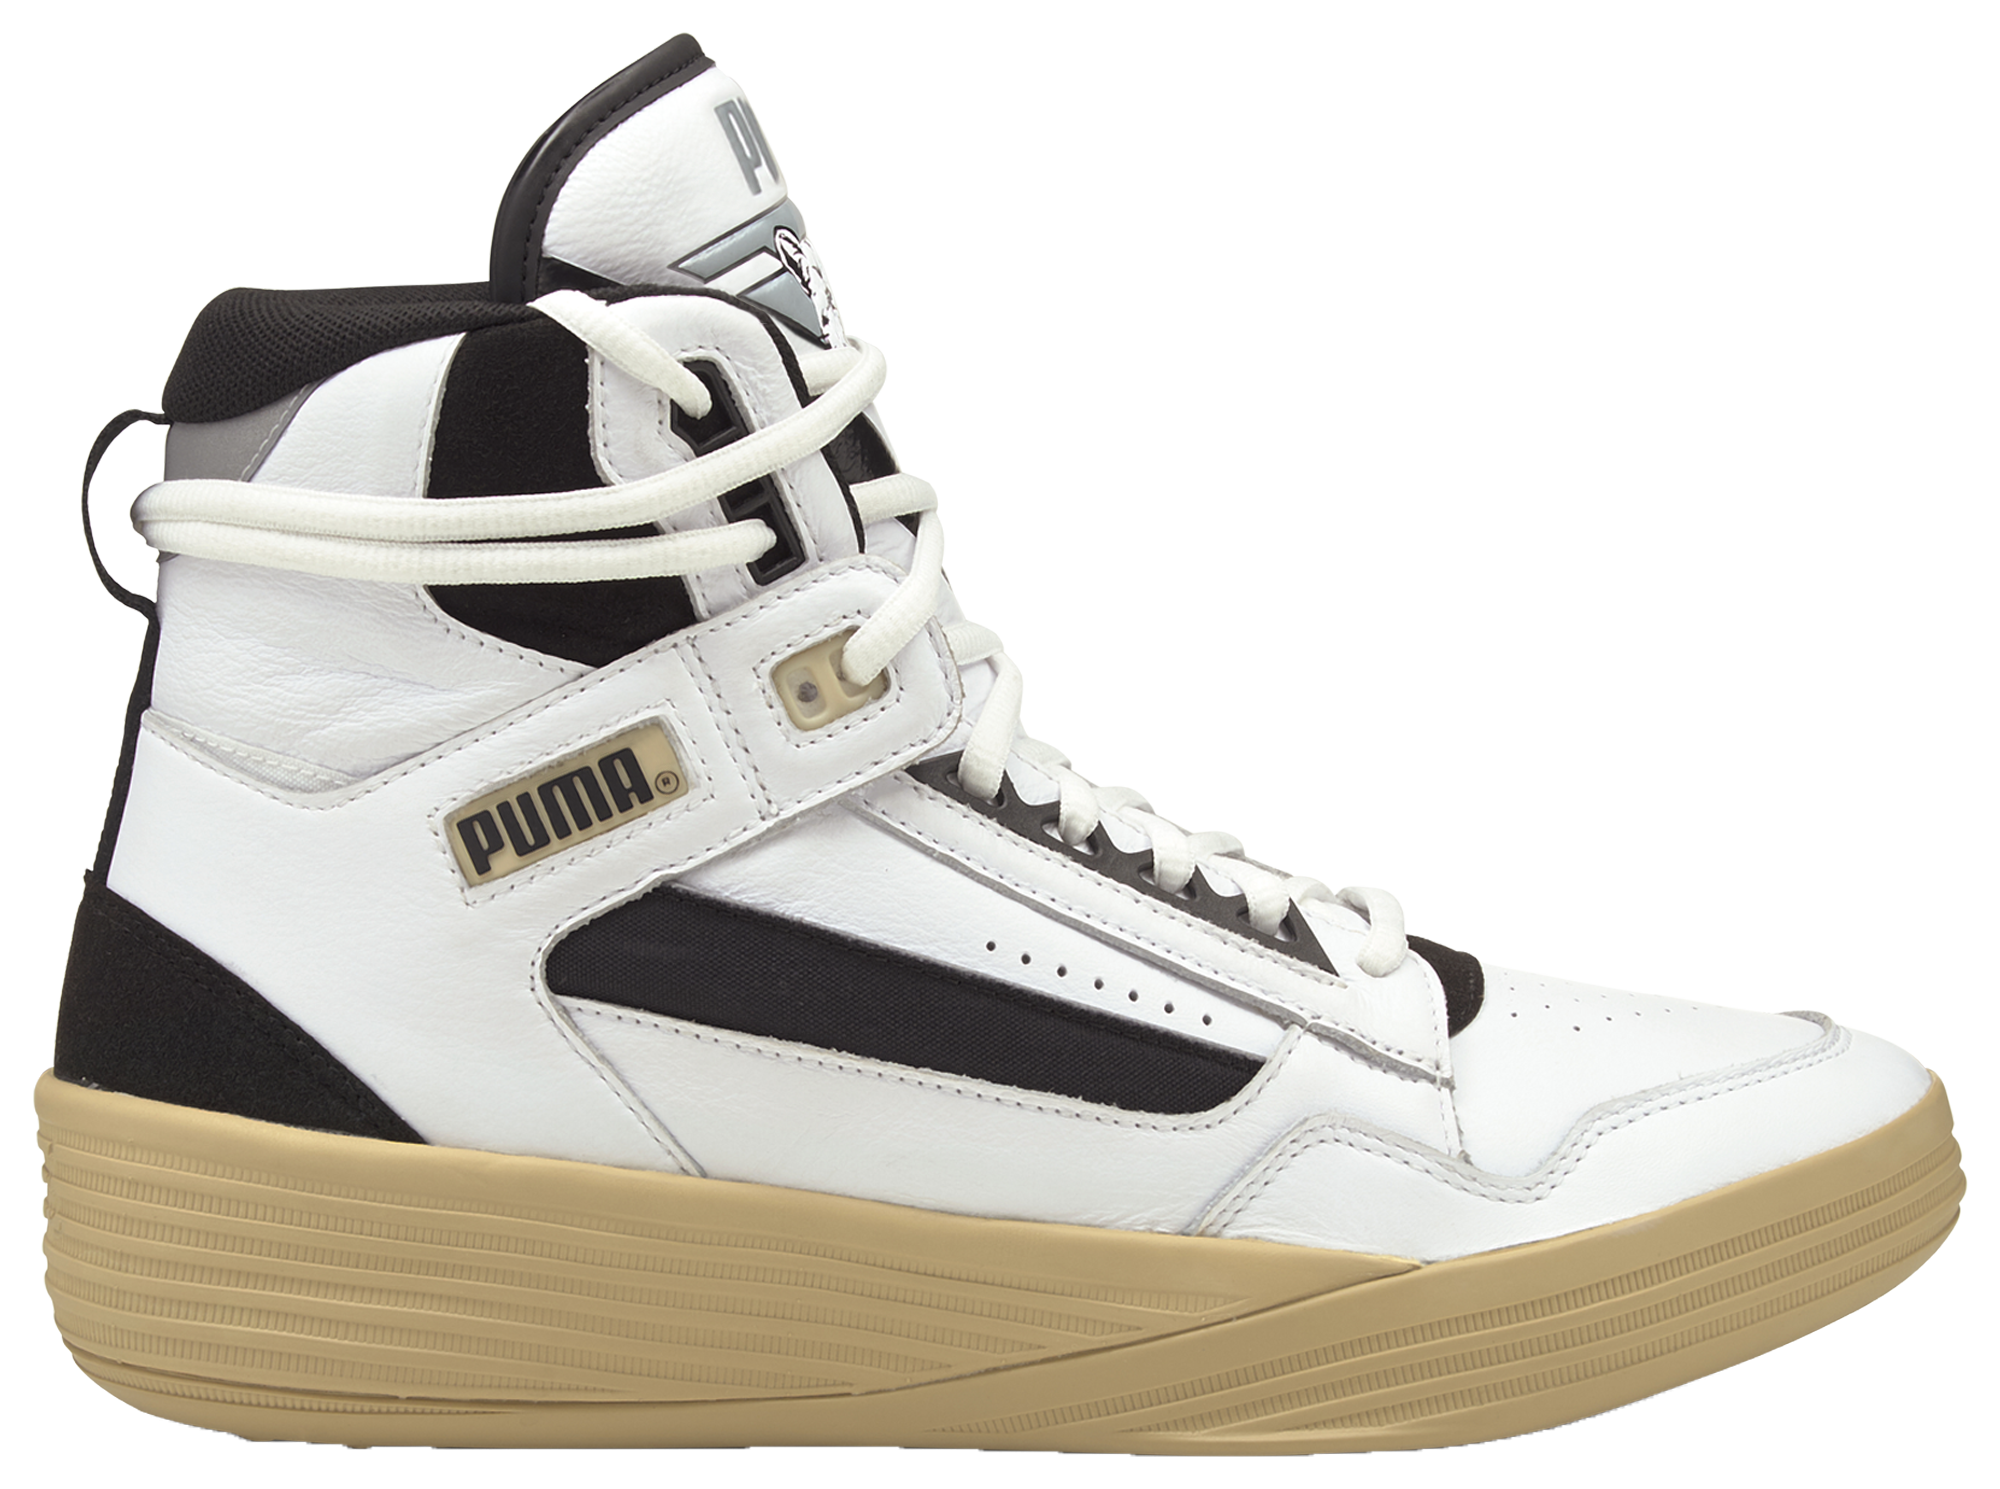 PUMA Clyde All-Pro Kuzma Mid - Men's | The Shops at Willow Bend